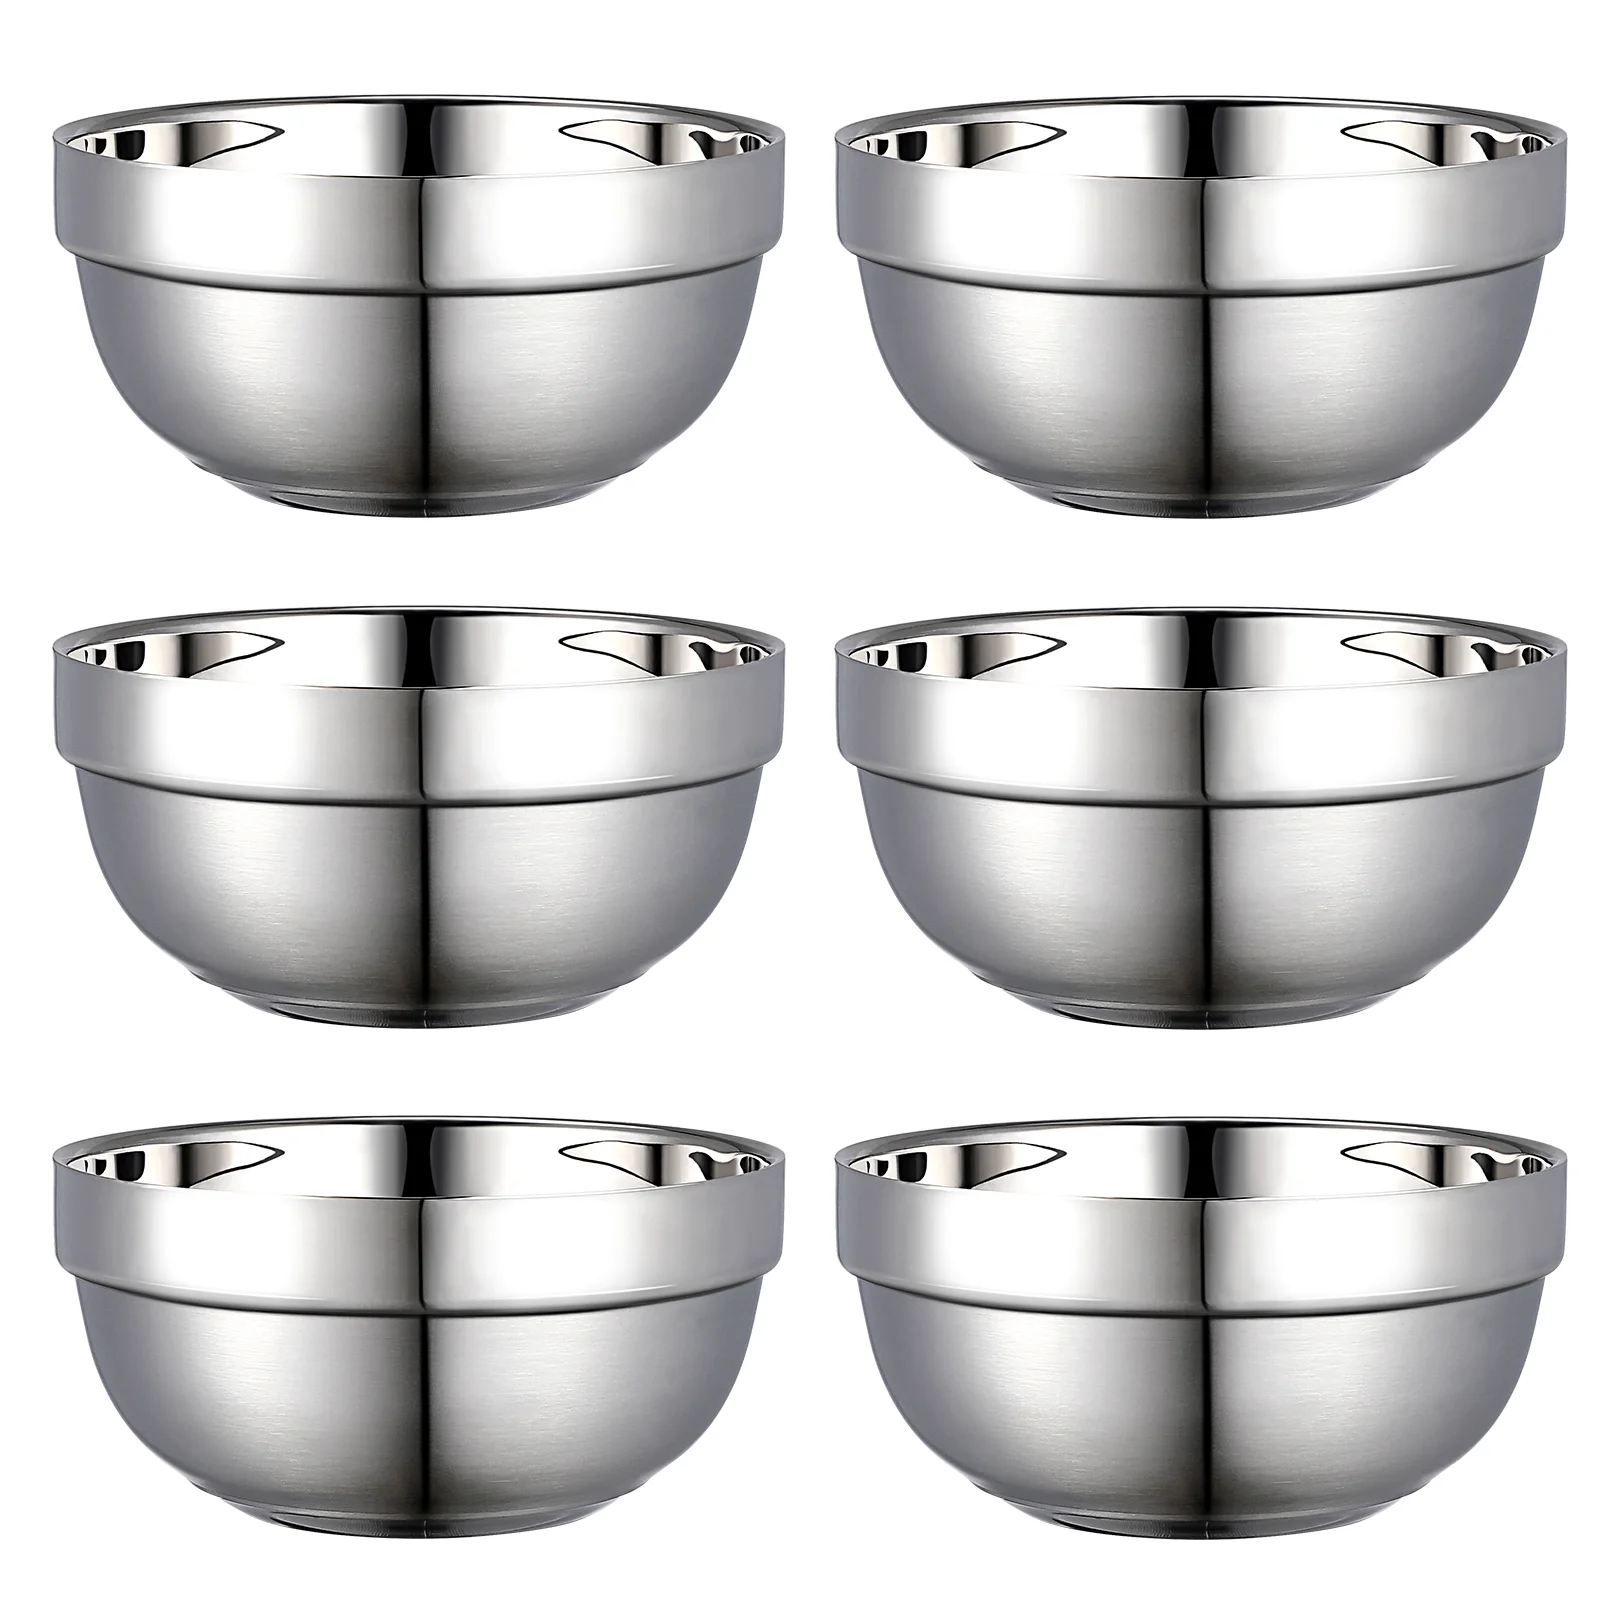 

13cm Stainless Steel Cereal Bowls Insulated Bowl Small Metal Bowl Korean Snack Nesting Bowl Heat Insulated Mixing Bowls